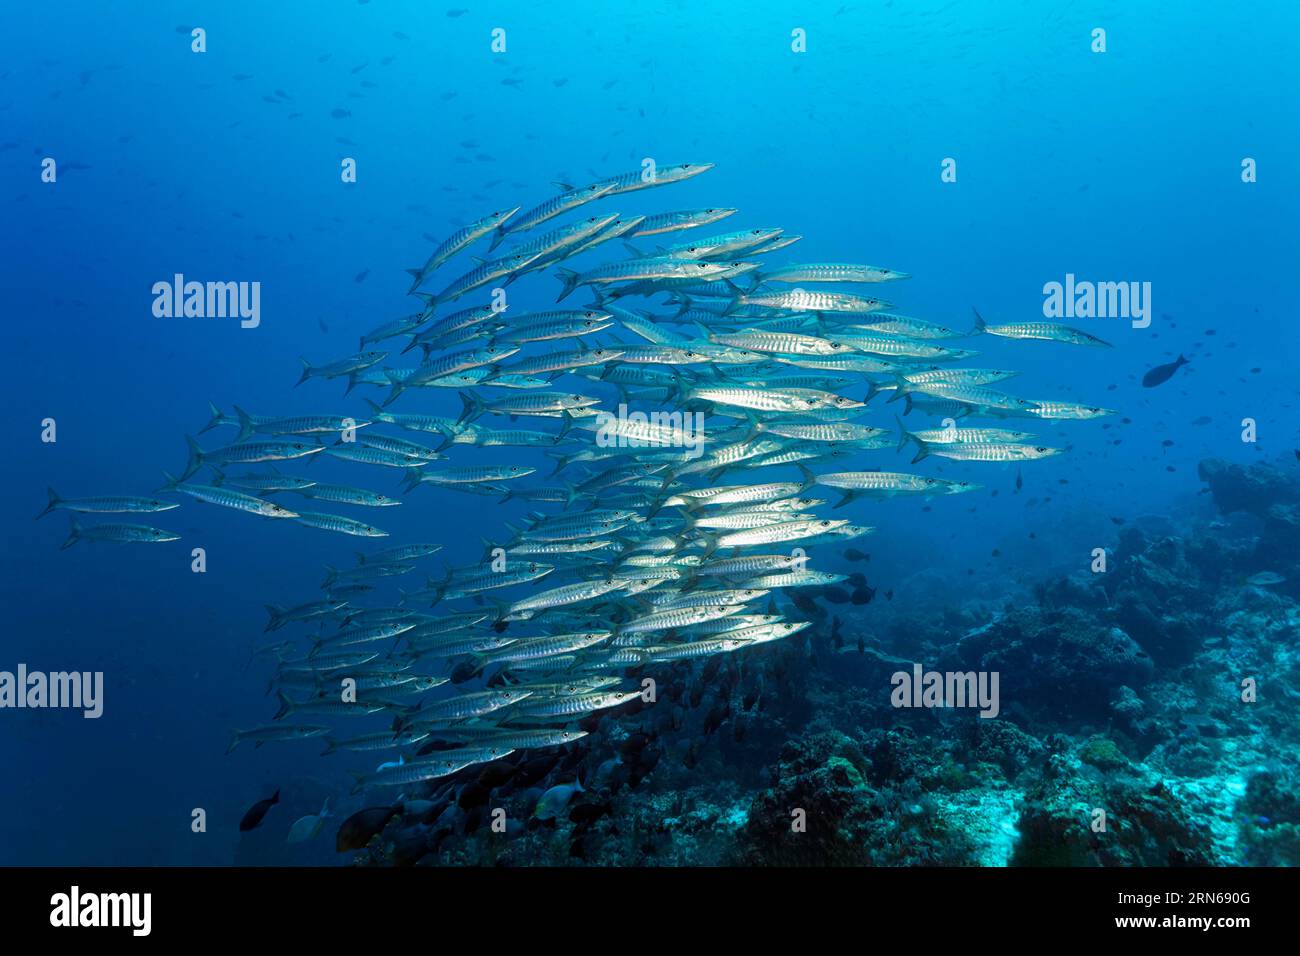 Shoal of sawtooth barracudas (Sphyraena putnamae) swimming across coral reef, Great Barrier Reef, UNESCO World Heritage Site, Coral Sea, Pacific Stock Photo